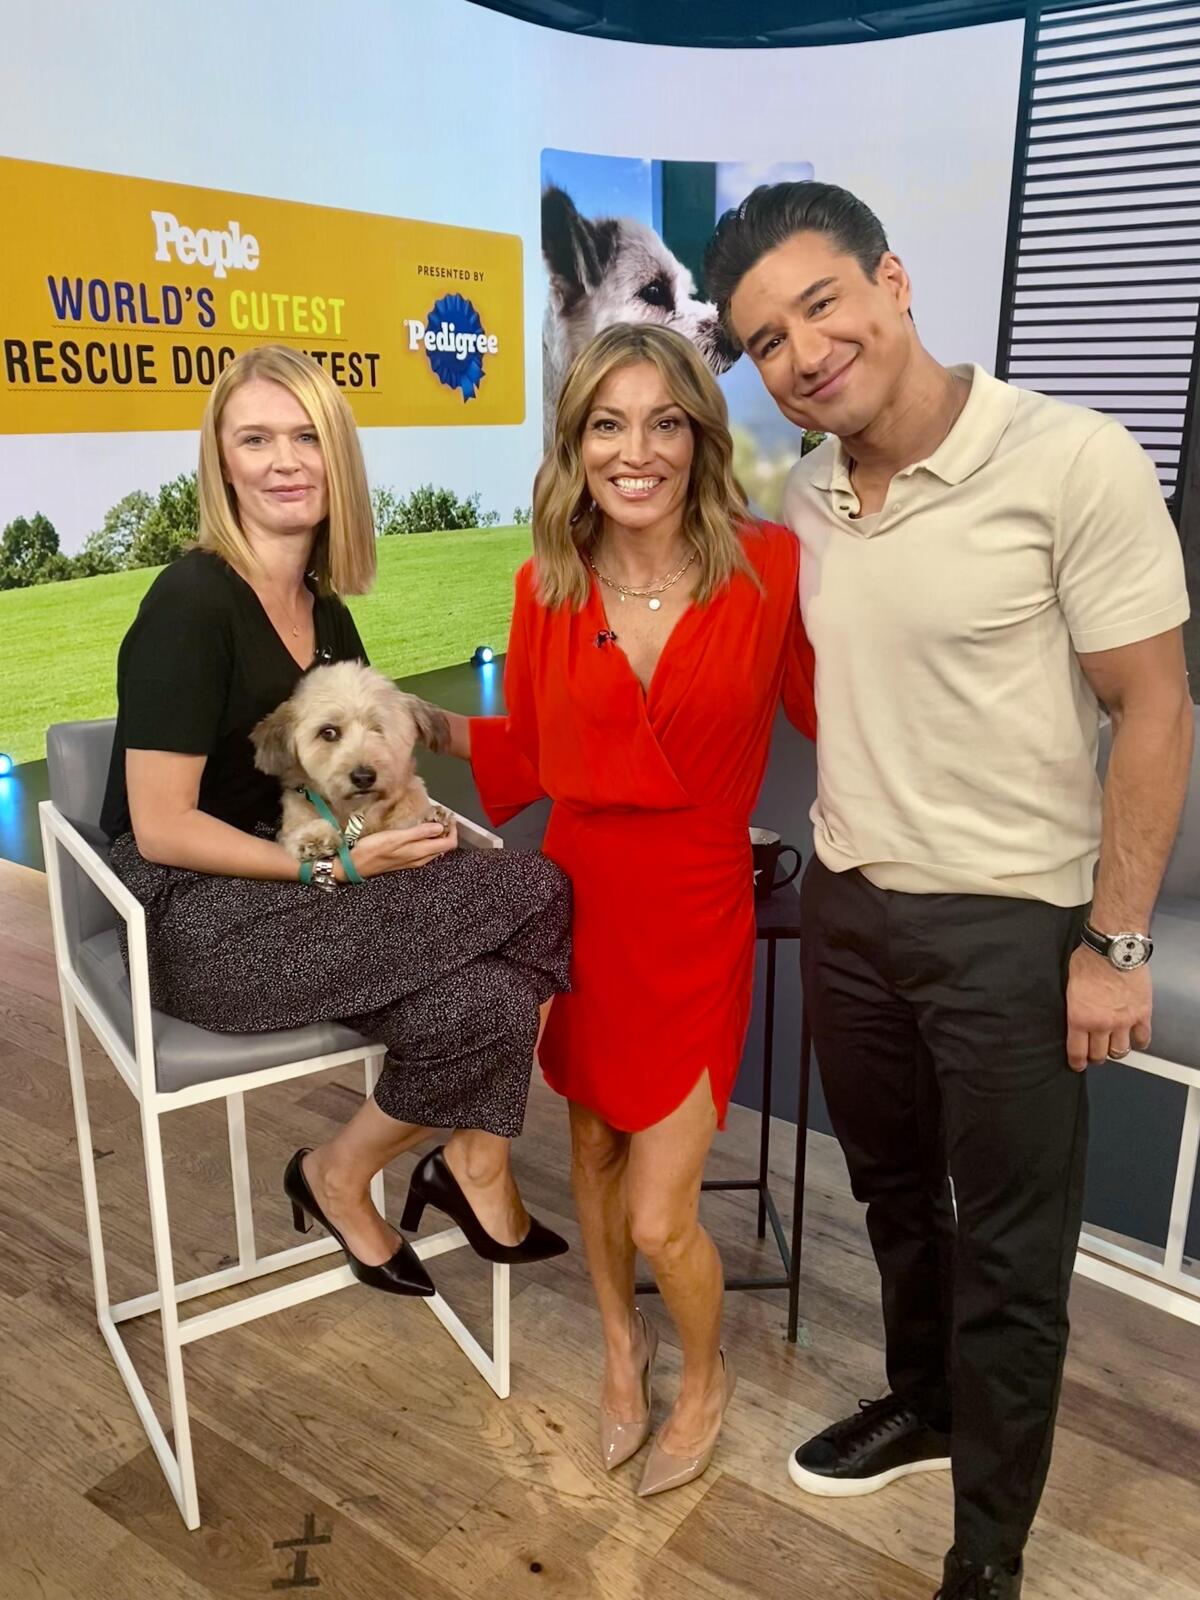 Coto de Caza resident Christin Bernardt, left, with dog Hobie and "Access Hollywood" hosts Kit Hoover and Mario Lopez.